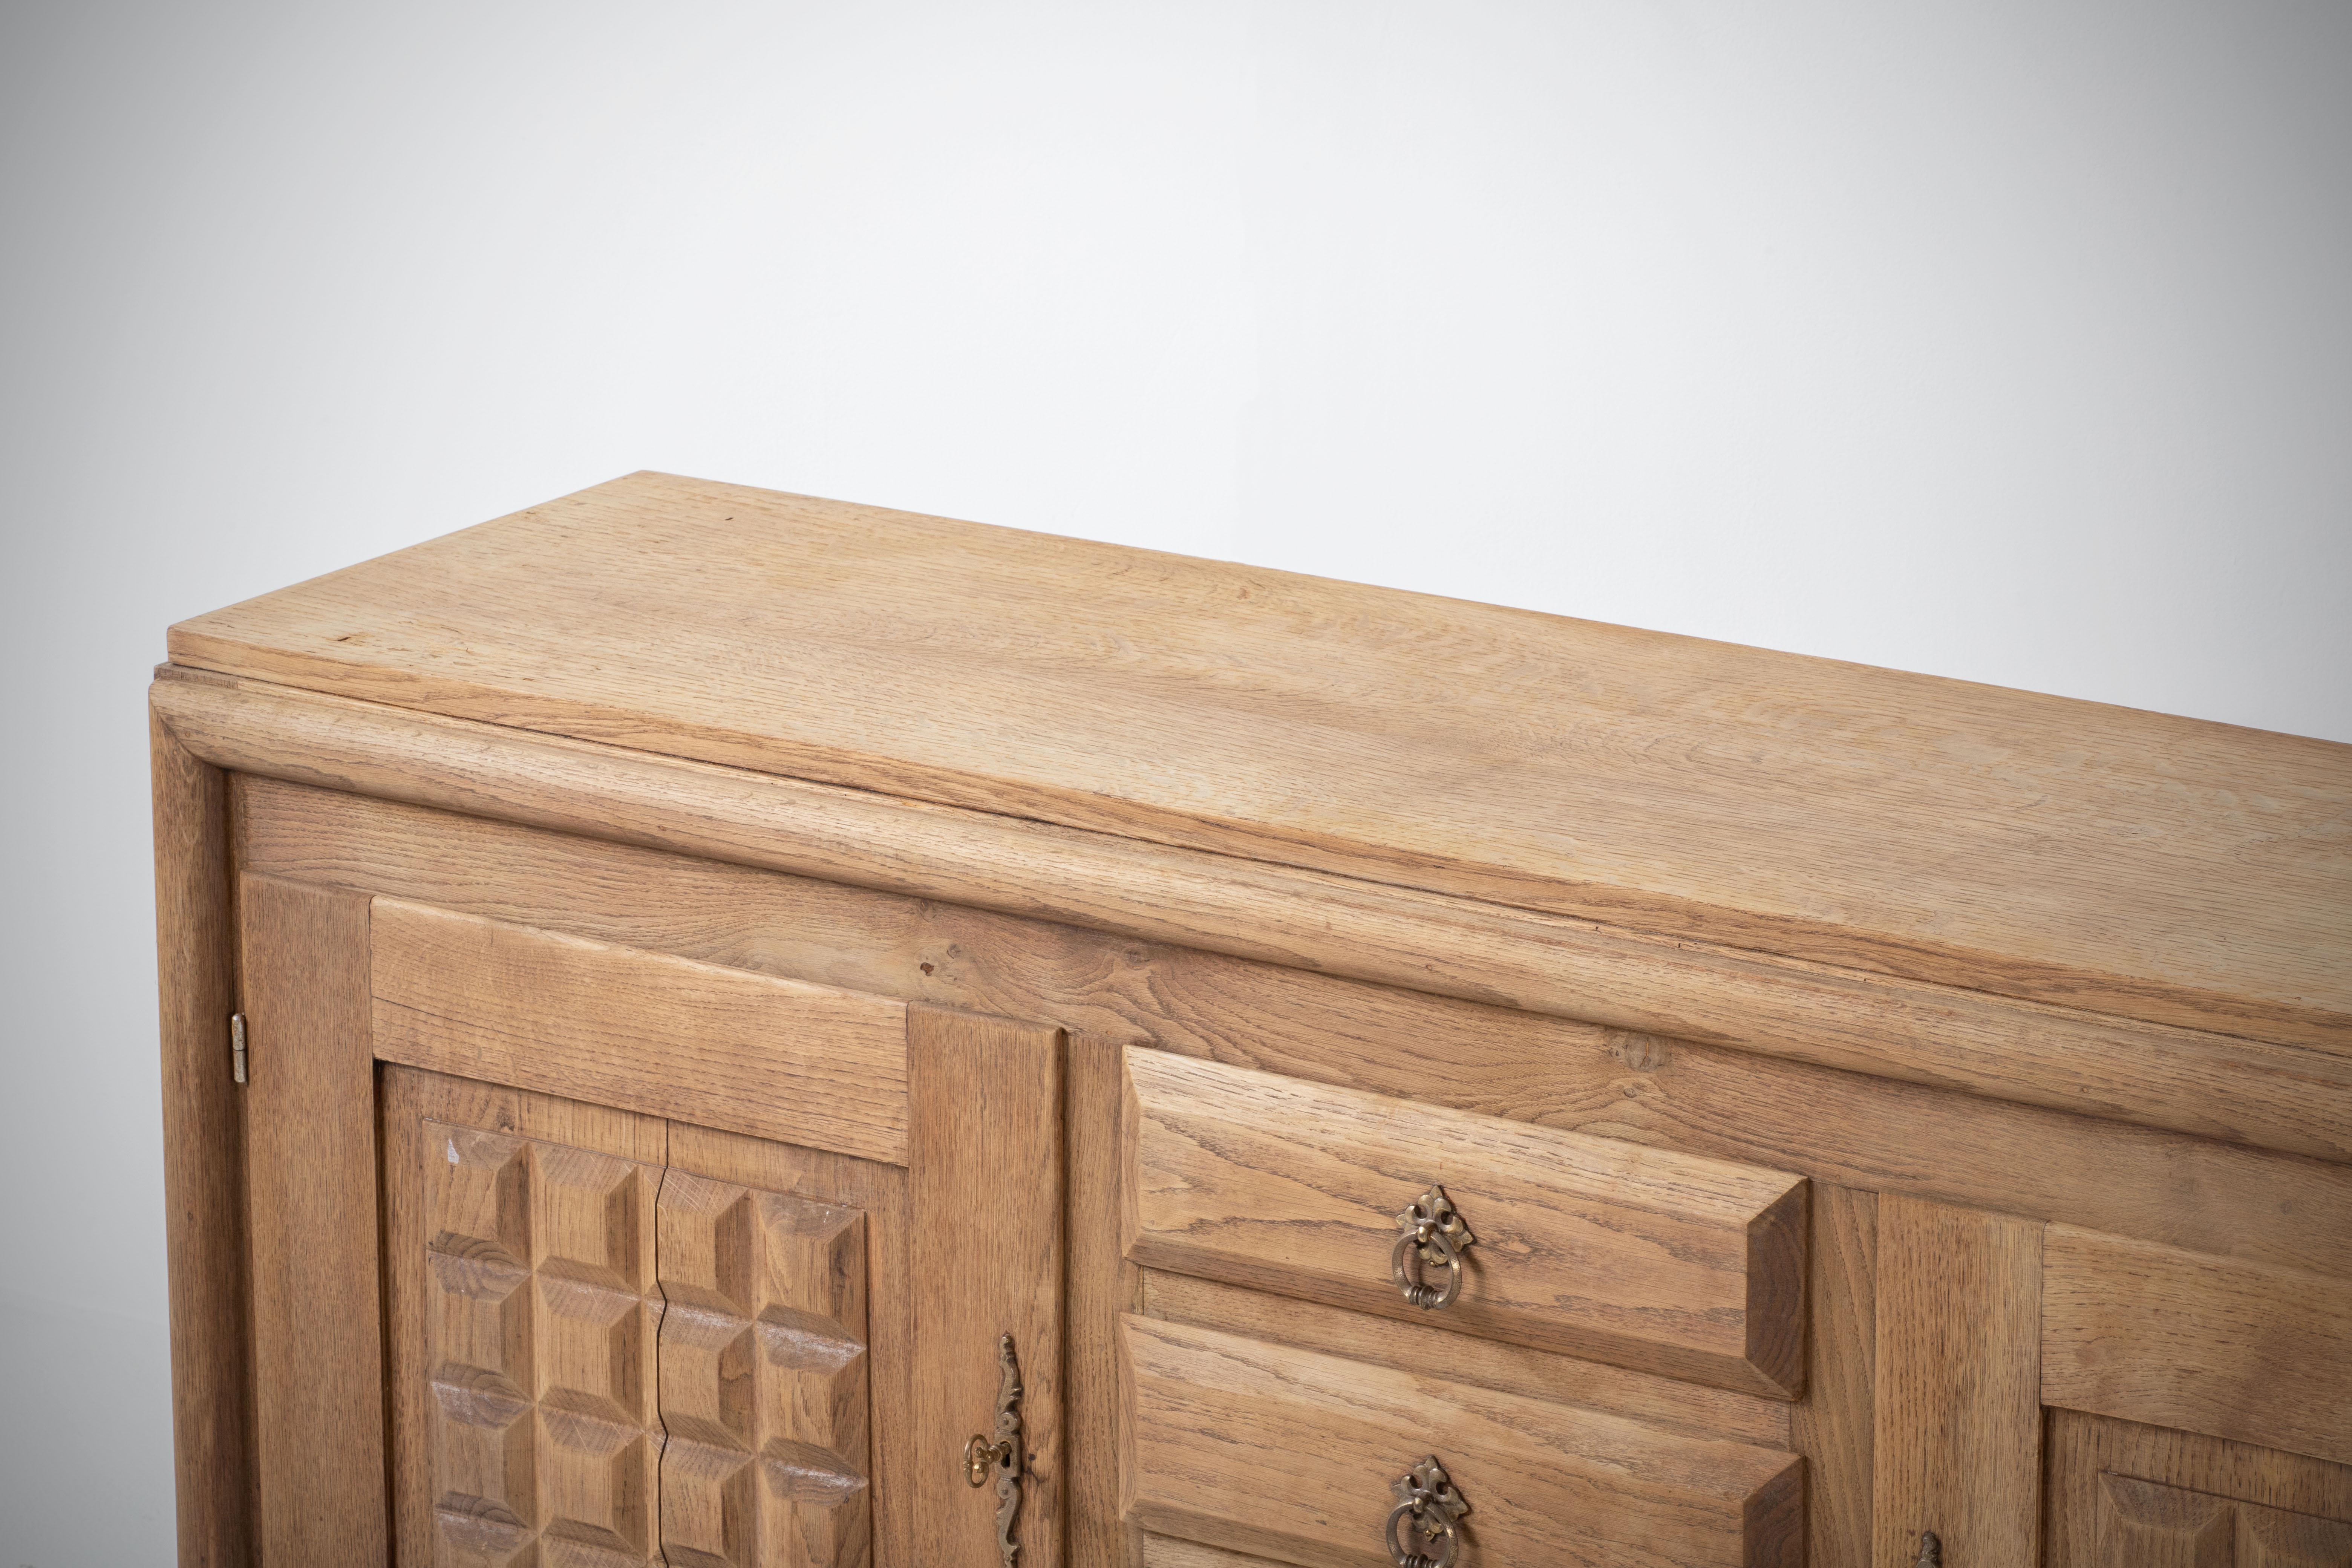 Raw Solid Oak Cabinet with Graphic Details, France, 1940s For Sale 6